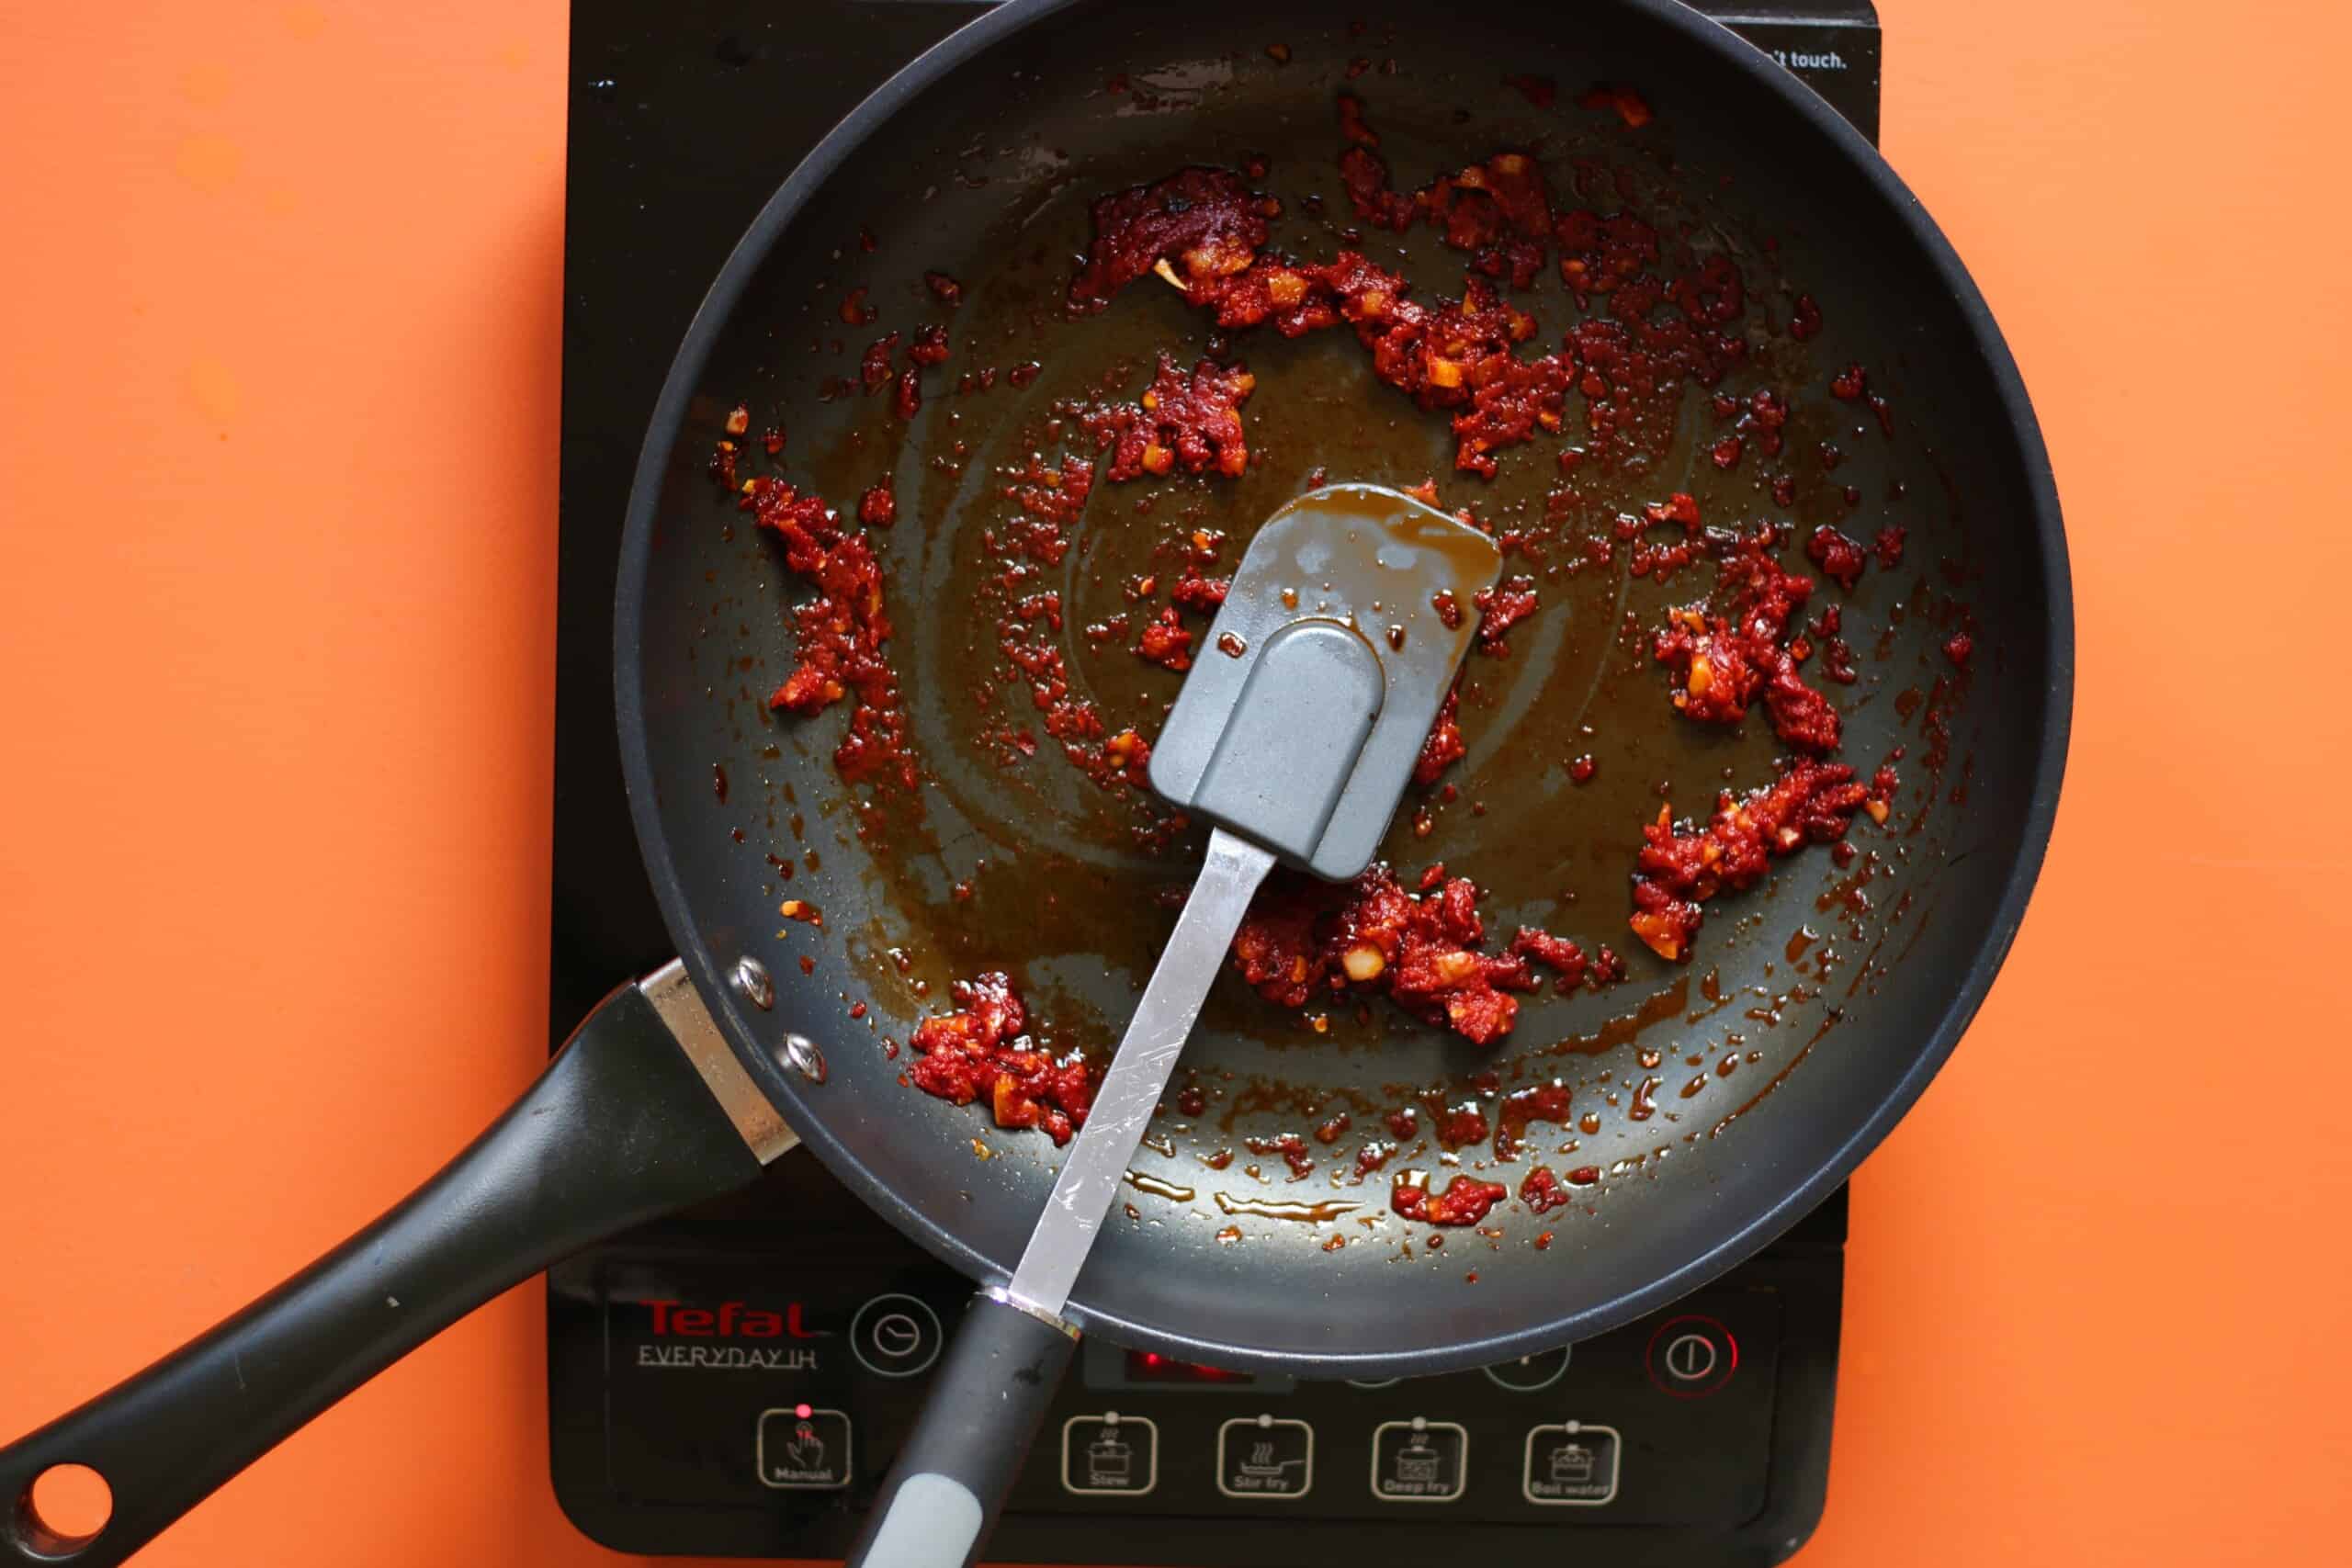 Fried tomato paste, chillies and garlic with oil in frying pan with spatula on a stove with an orange background.